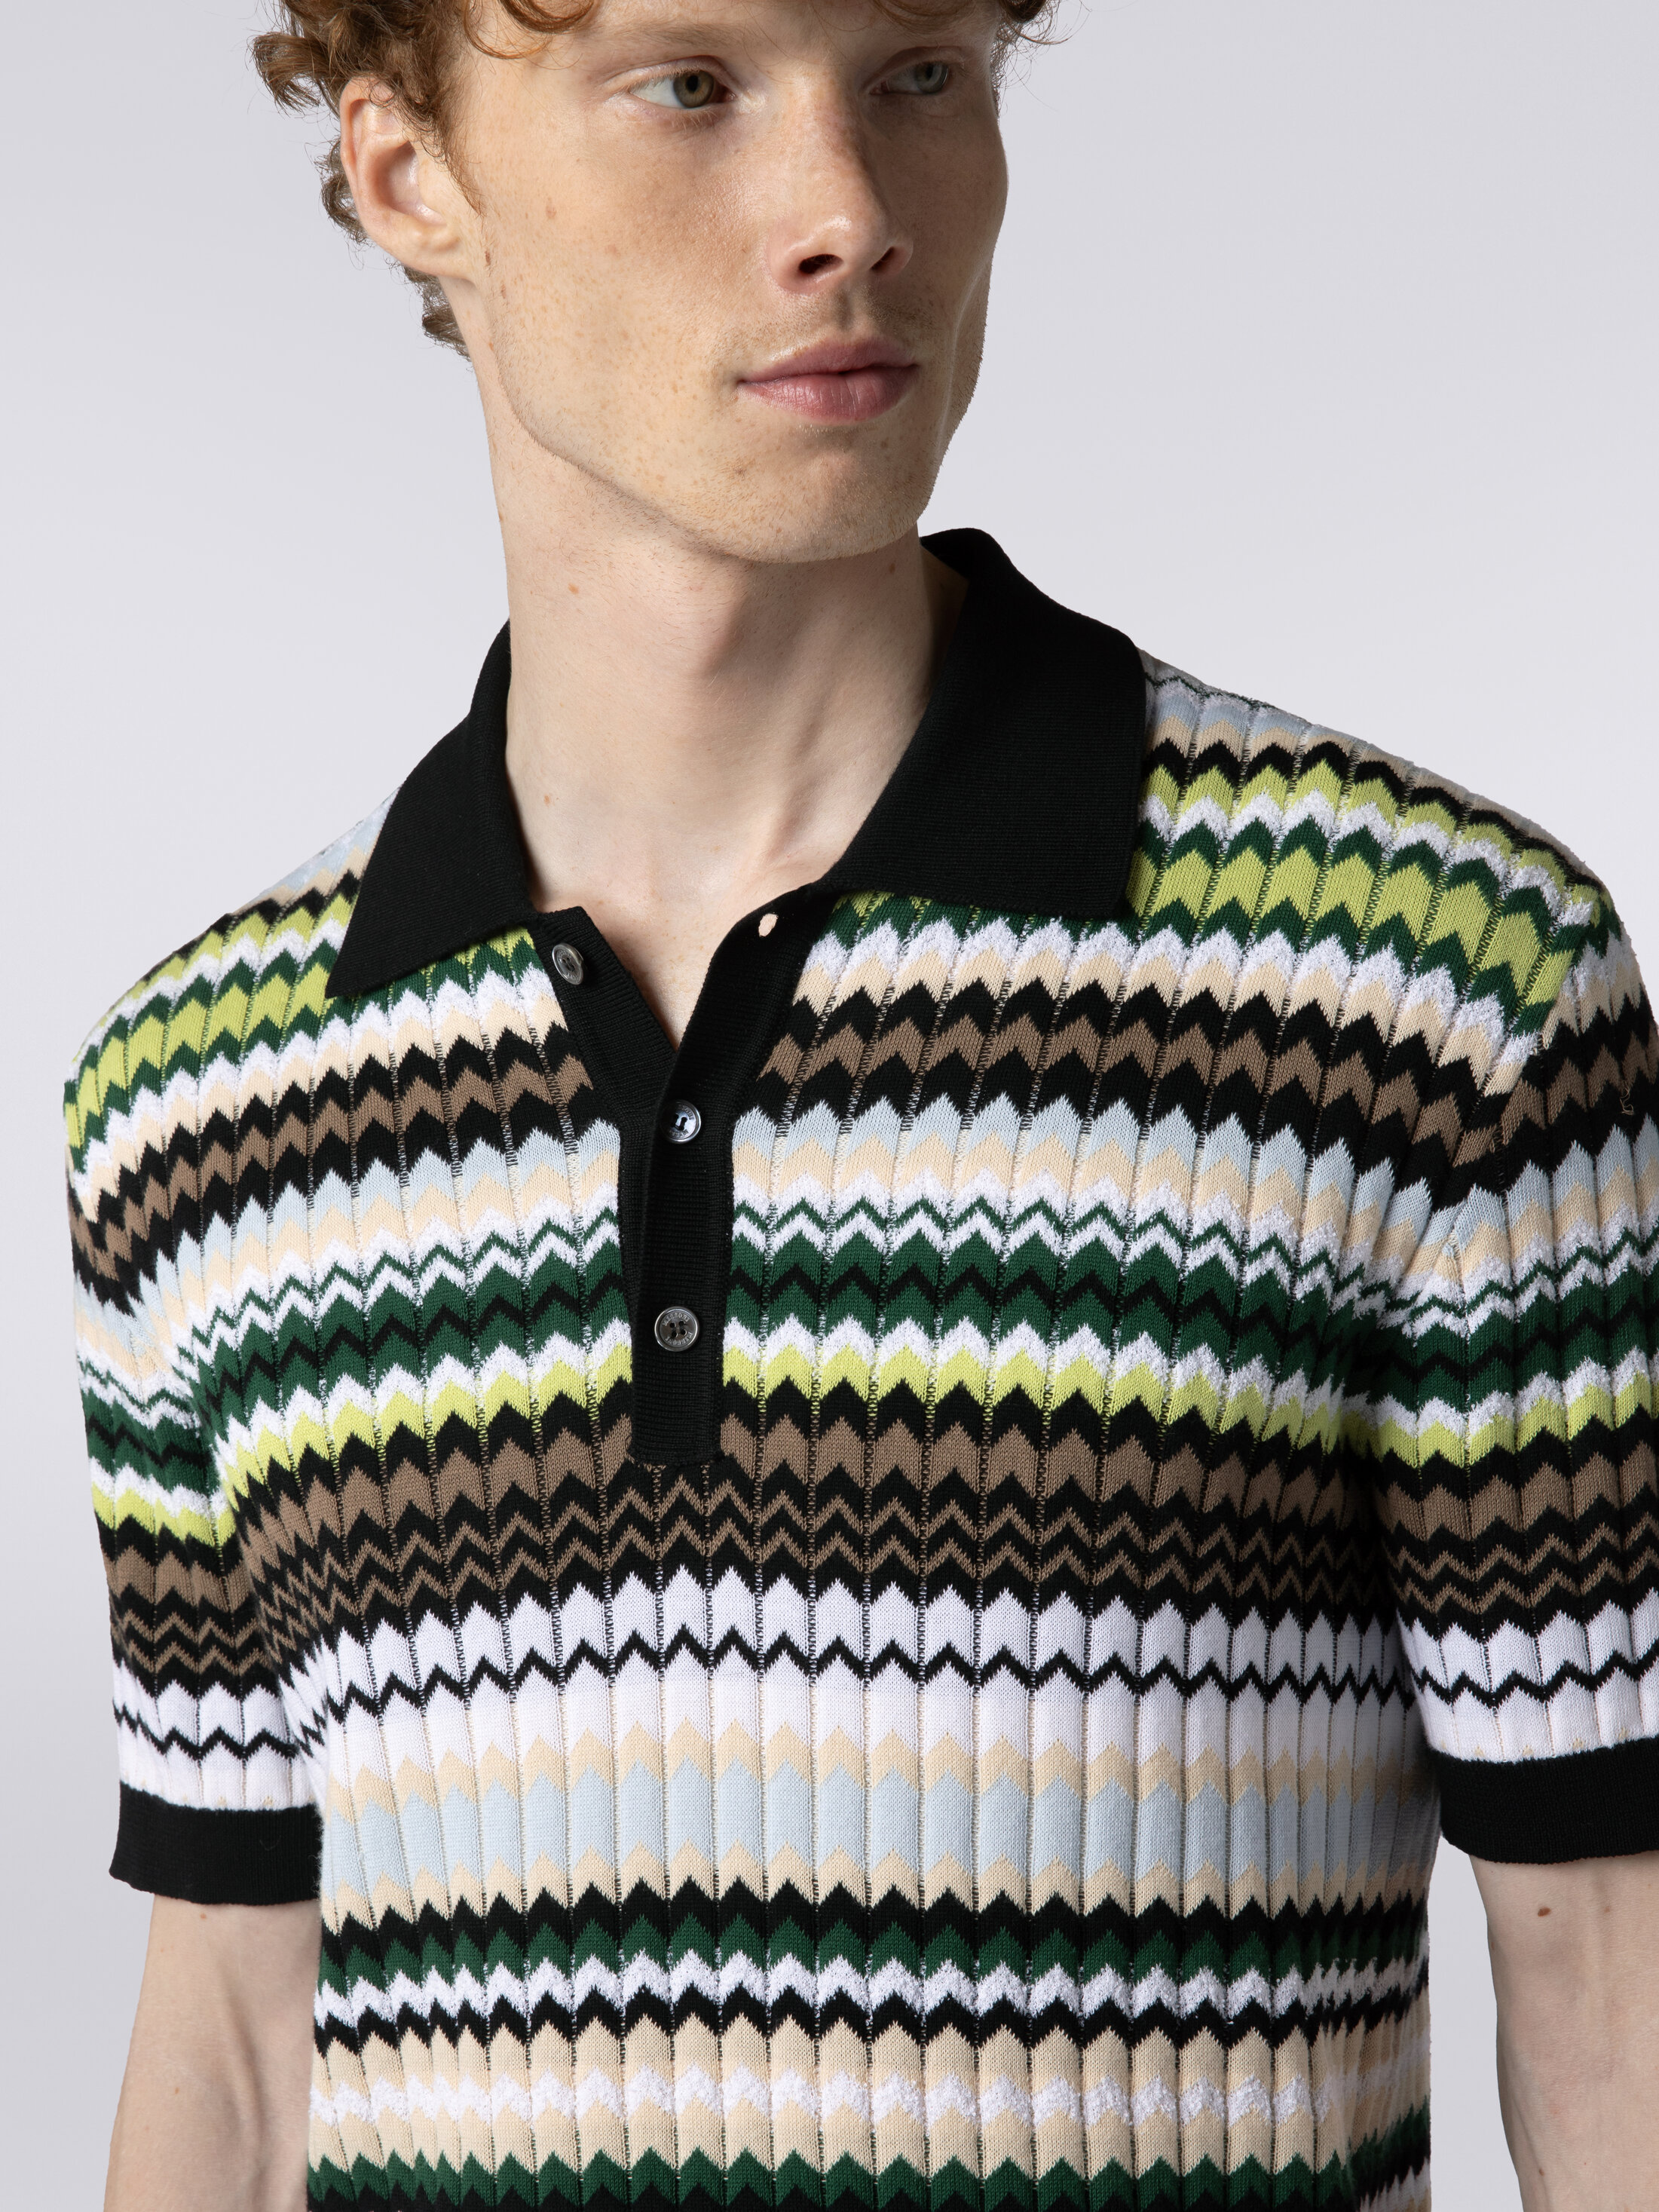 Short-sleeved polo shirt in zigzag cotton knit